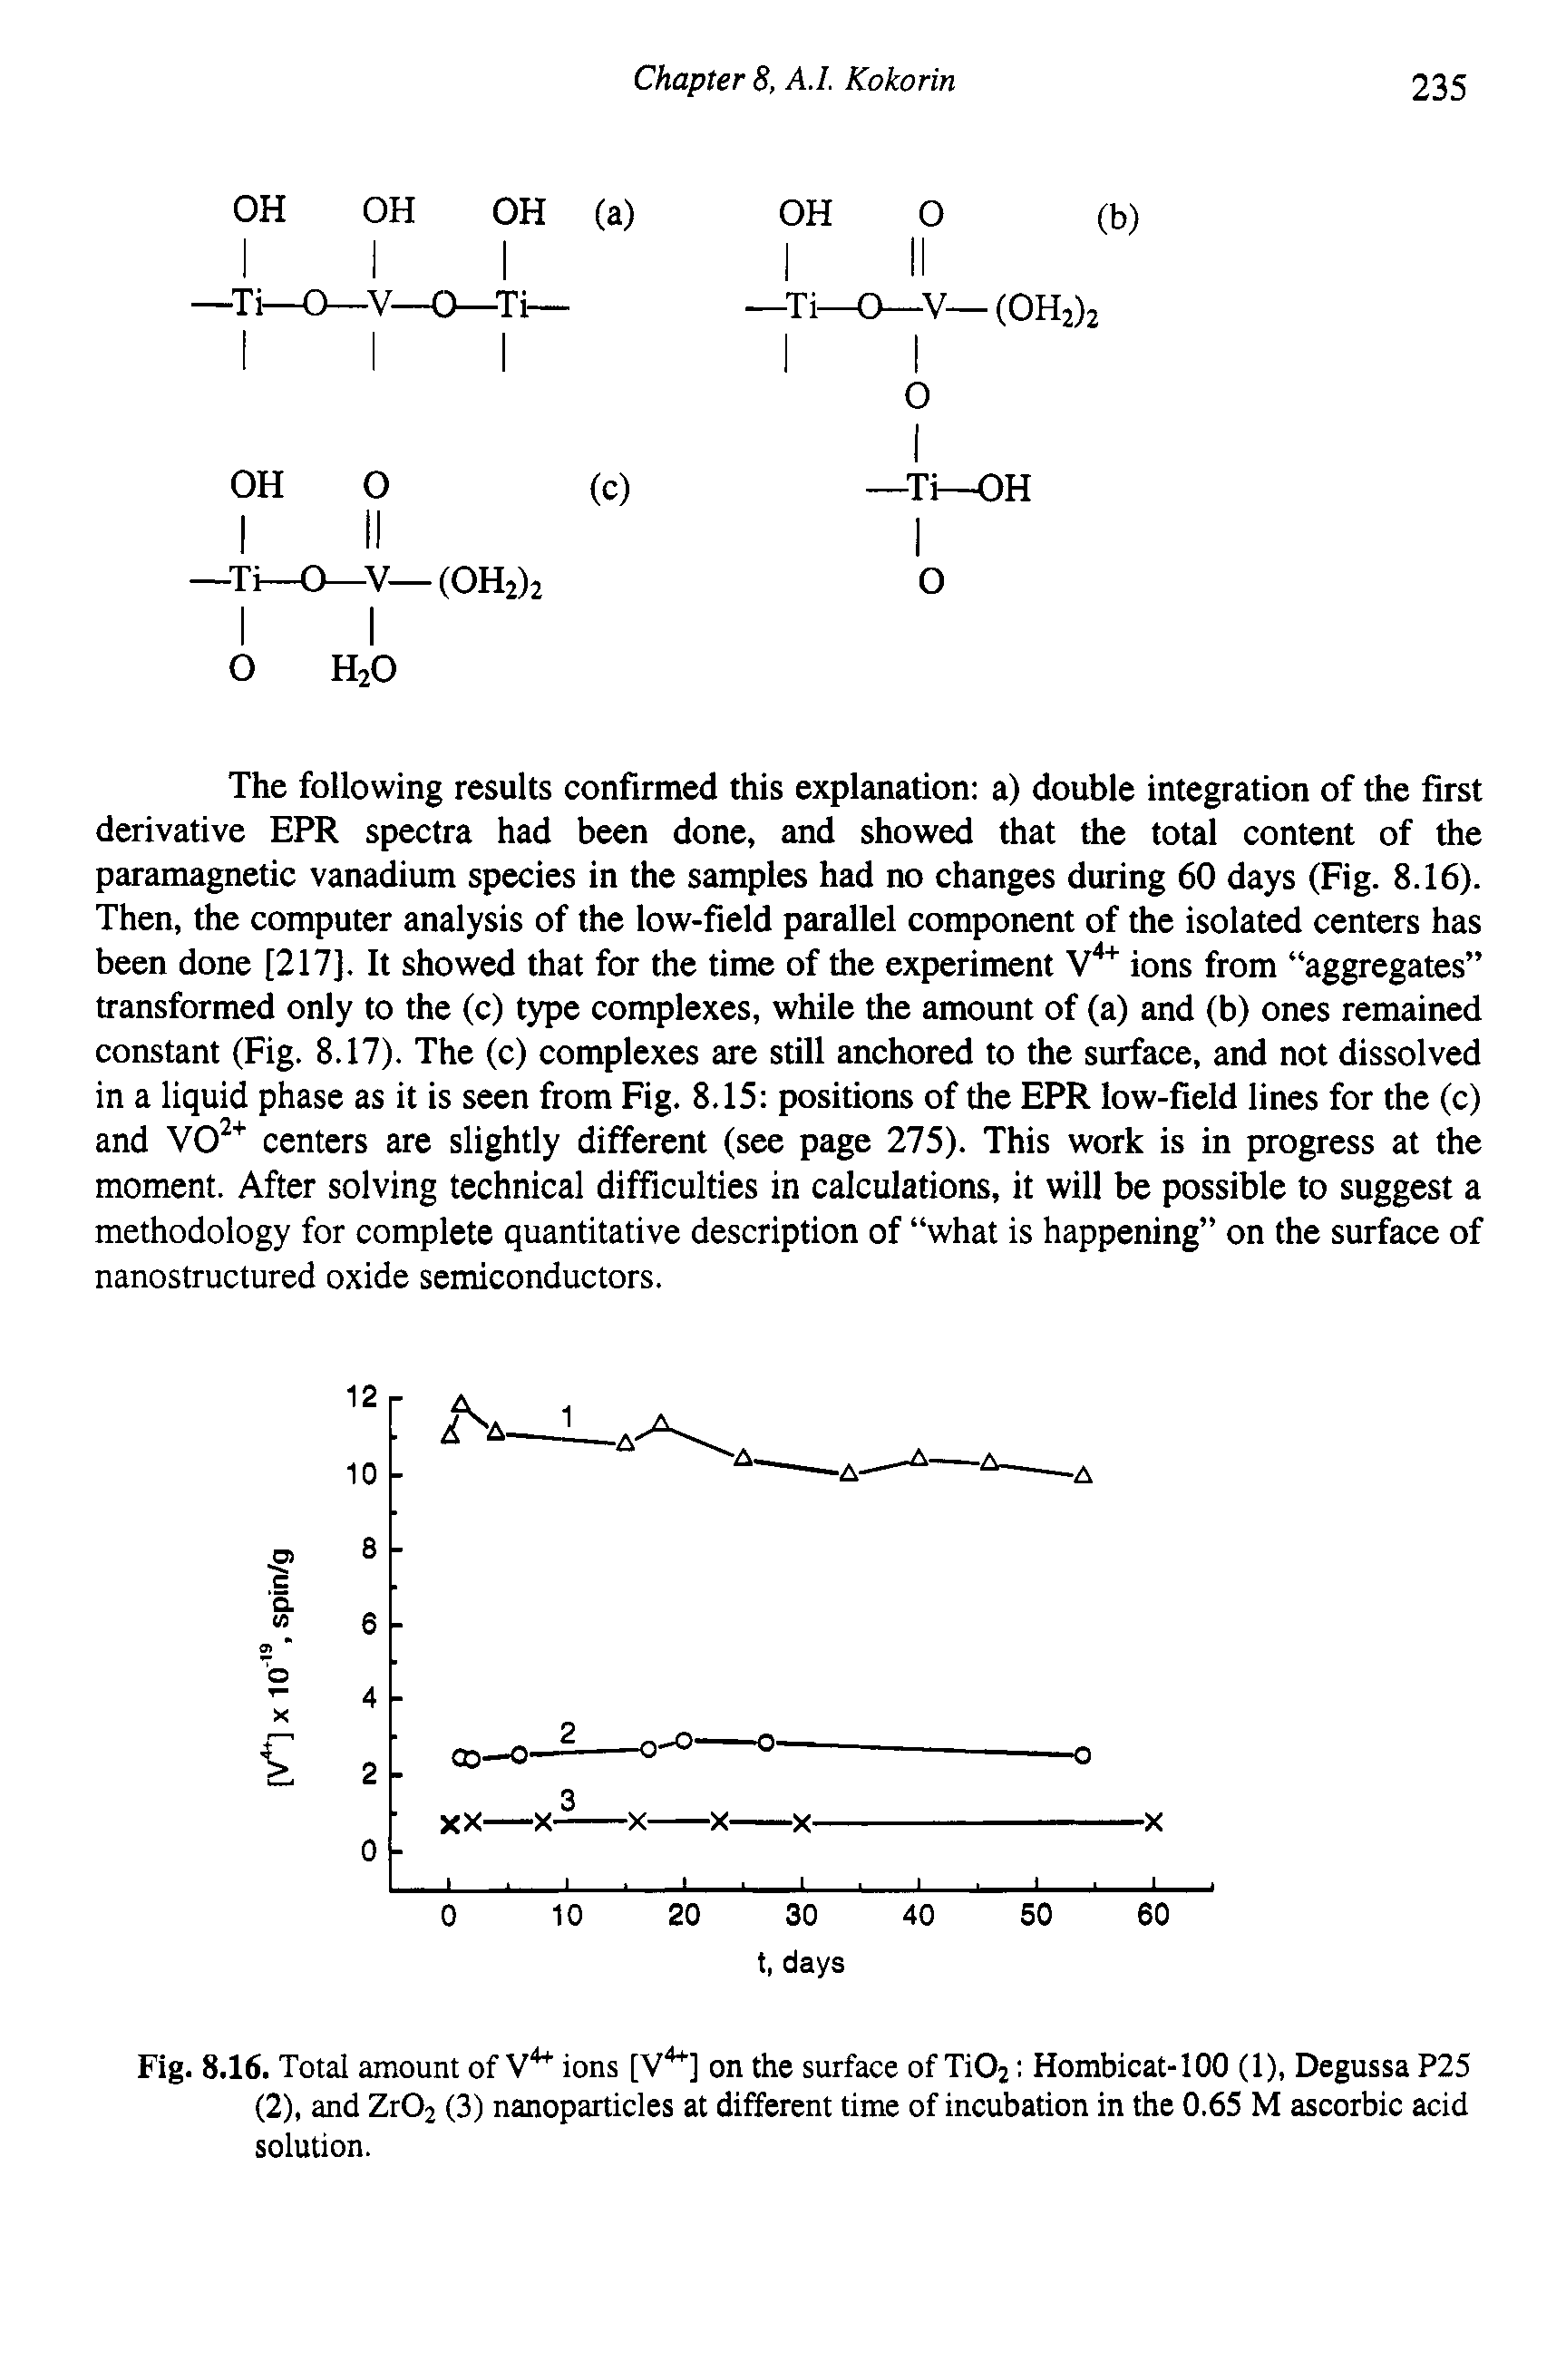 Fig. 8.16. Total amount of V4 ions [V4 ] on the surface of Ti02 Hombicat-100 (1), Degussa P25 (2), and Zr02 (3) nanoparticles at different time of incubation in the 0.65 M ascorbic acid solution.